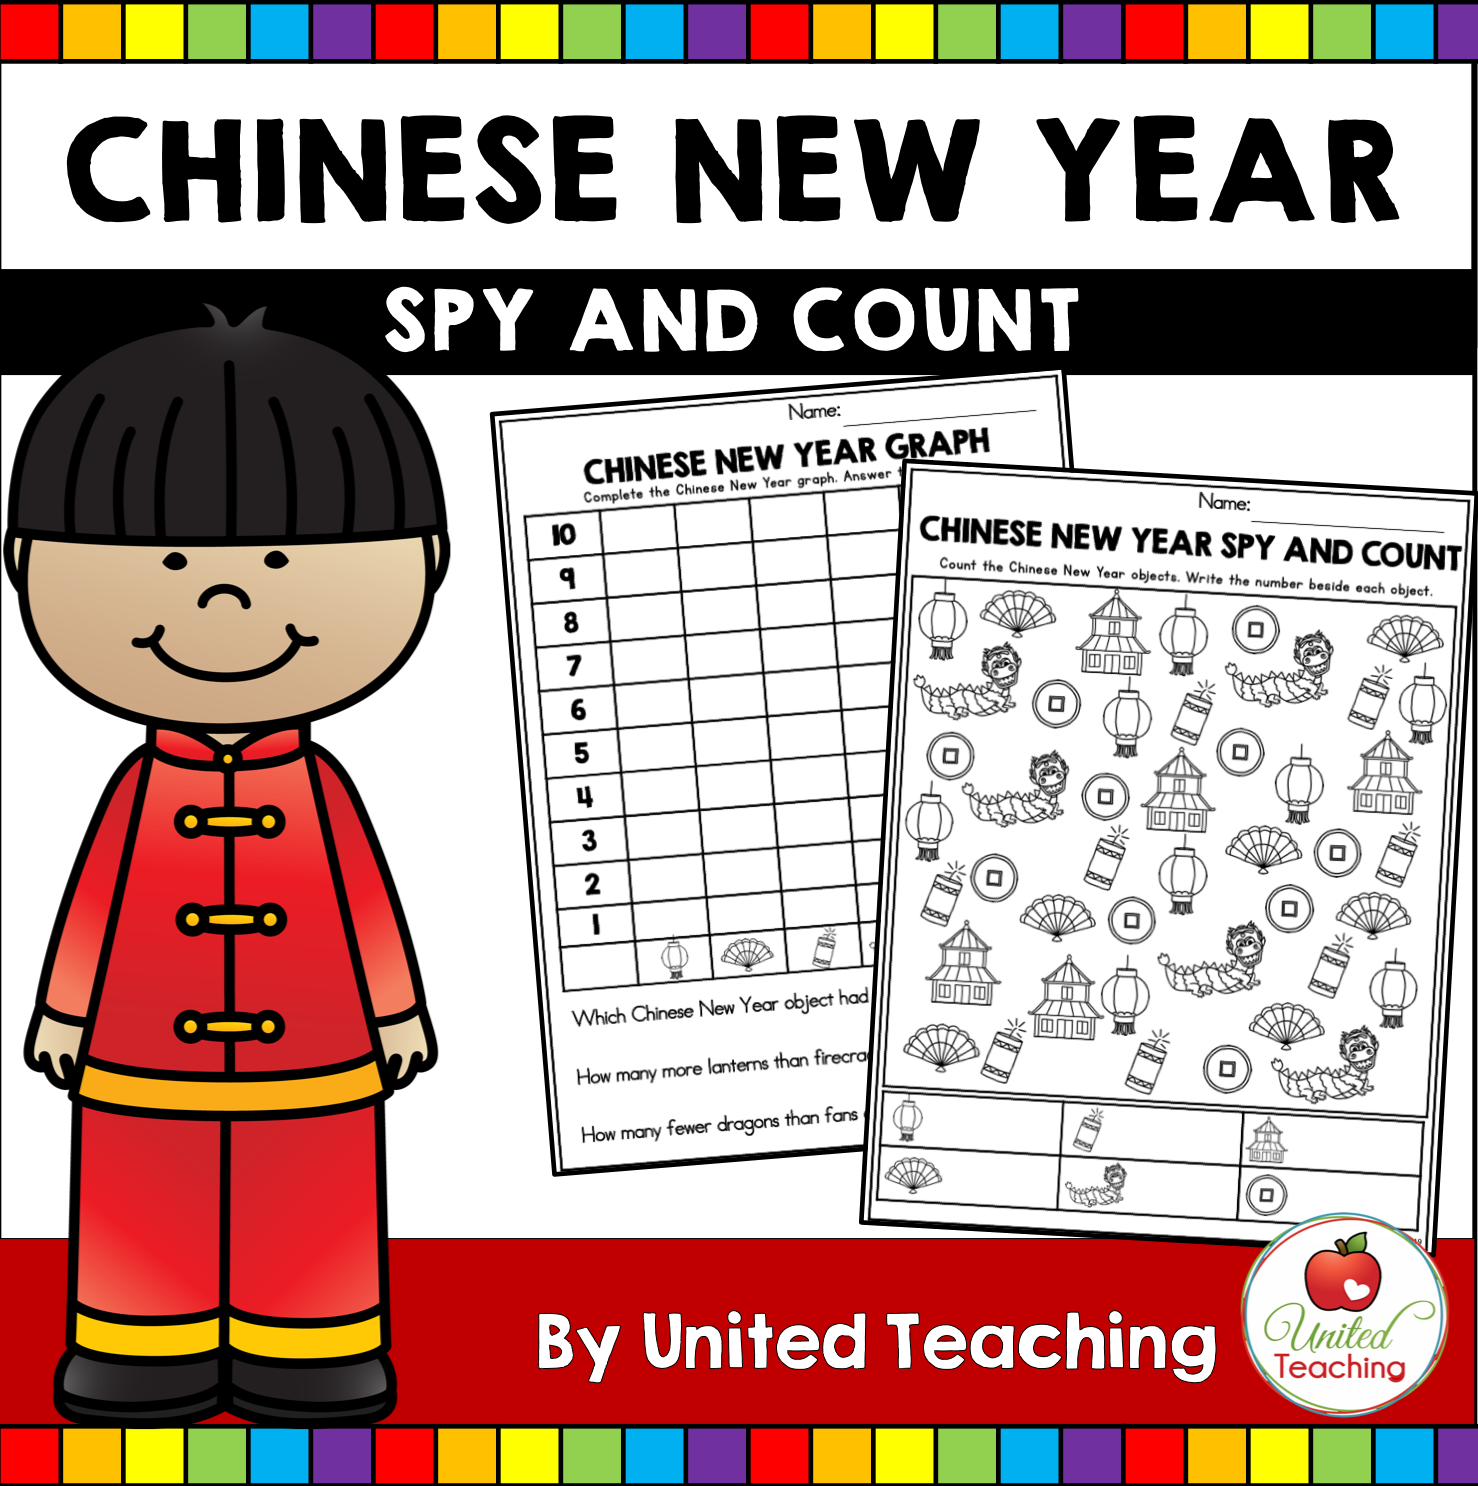 Chinese New Year Spy and Count Cover